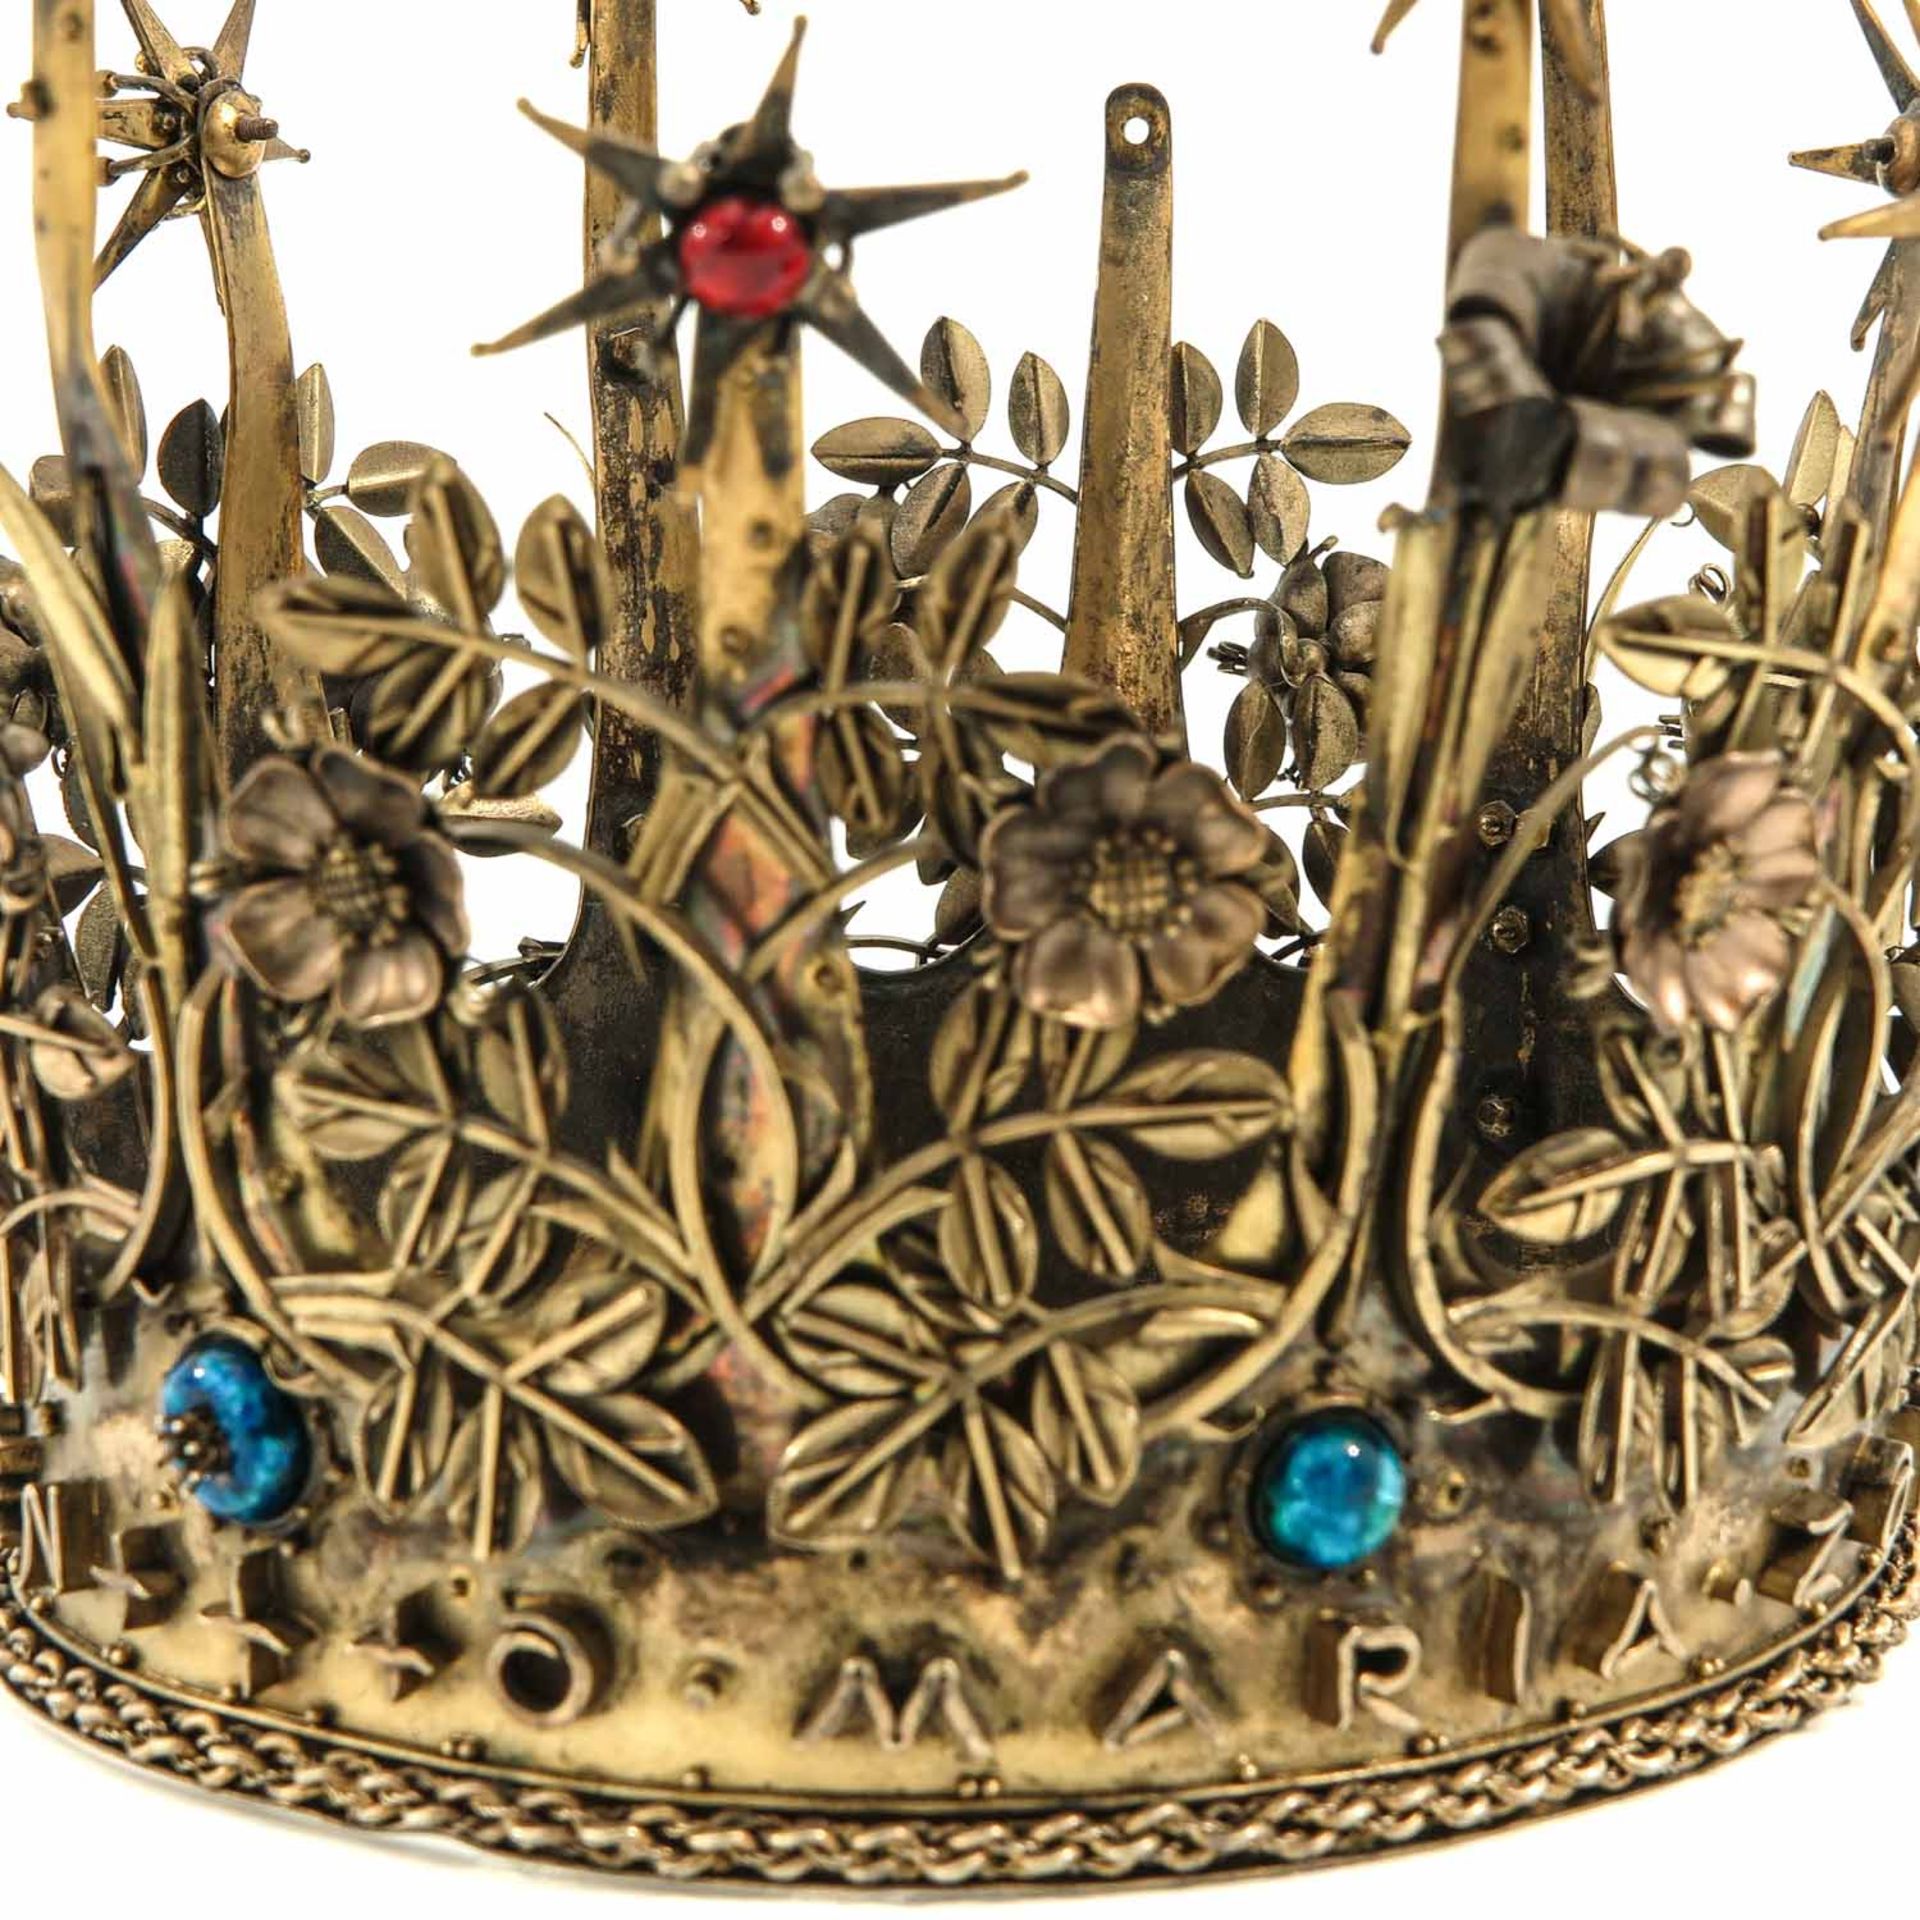 A Beautiful Crown for a Saint Sculpture - Image 8 of 9